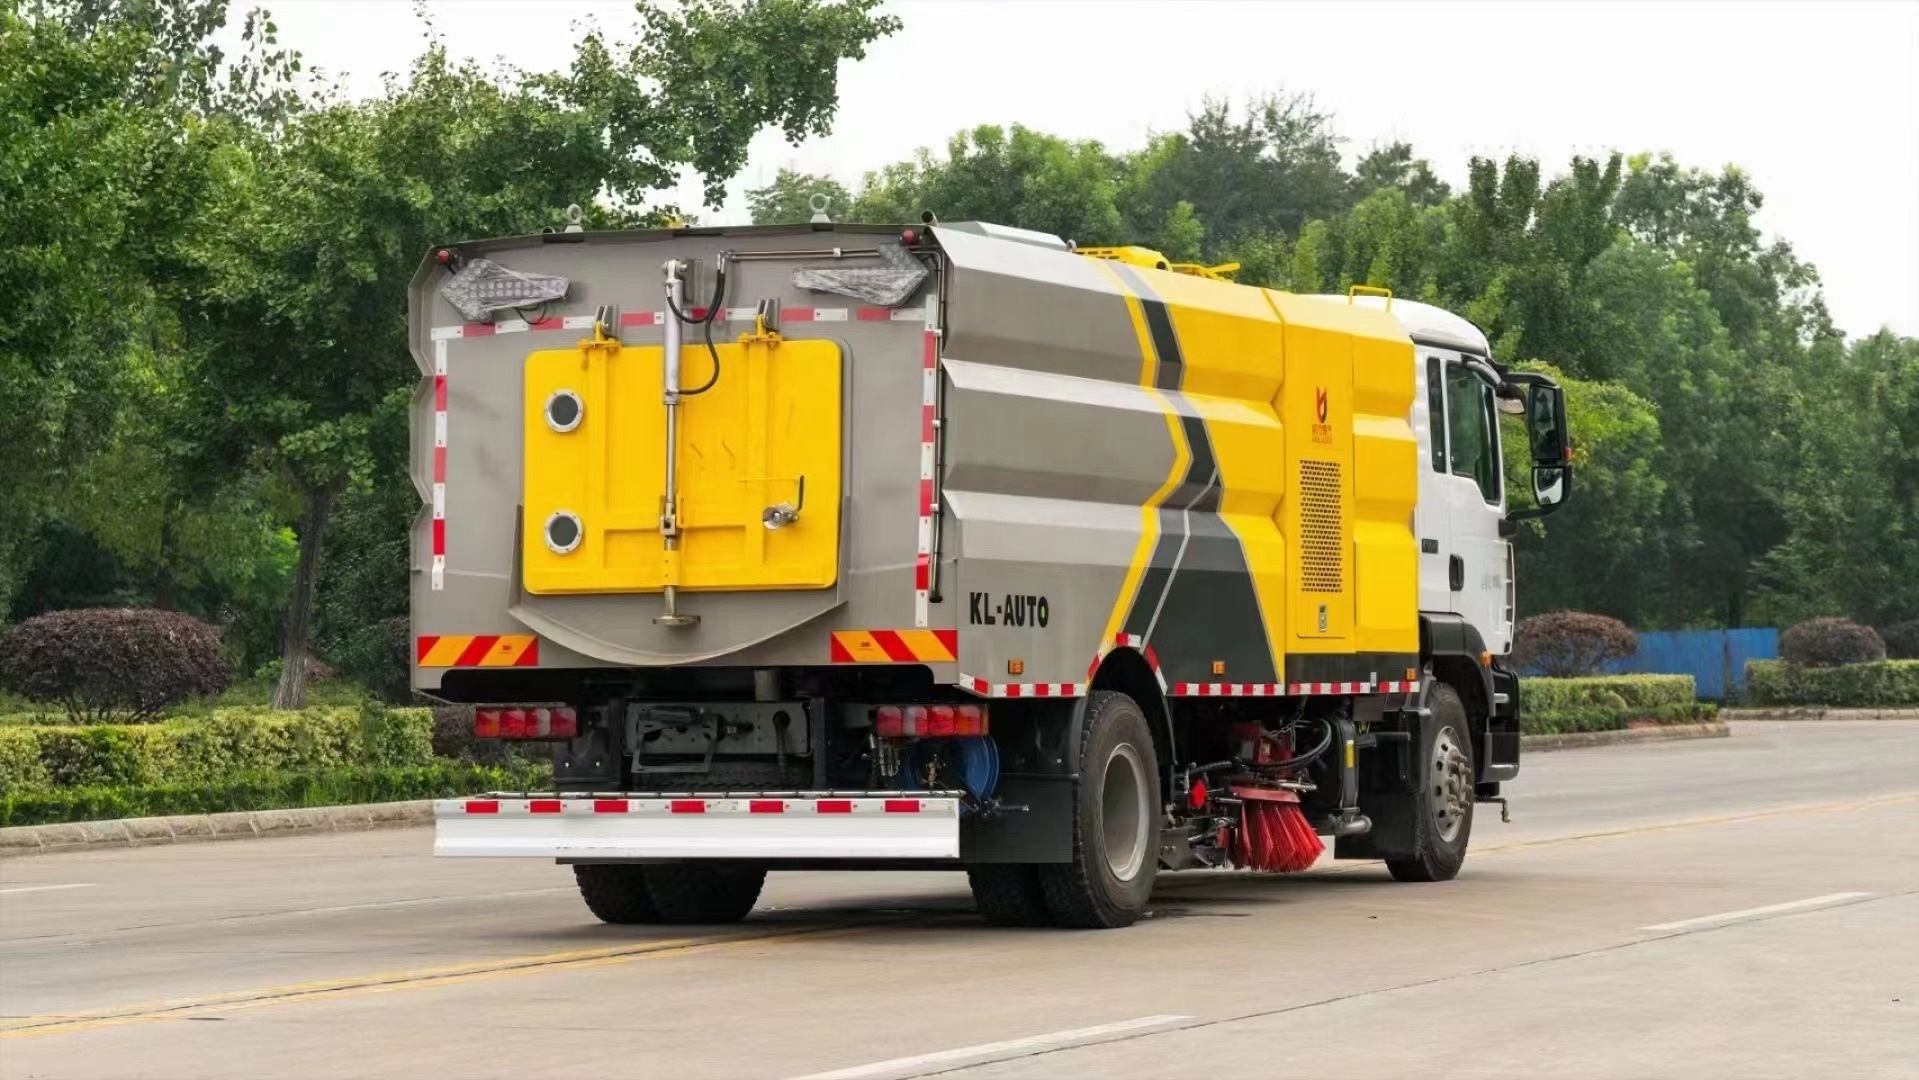 Vehicle Road Cleaning Dust Vacuum Sweeper Truck 4 2 Washing Street Ordinary Building Tank